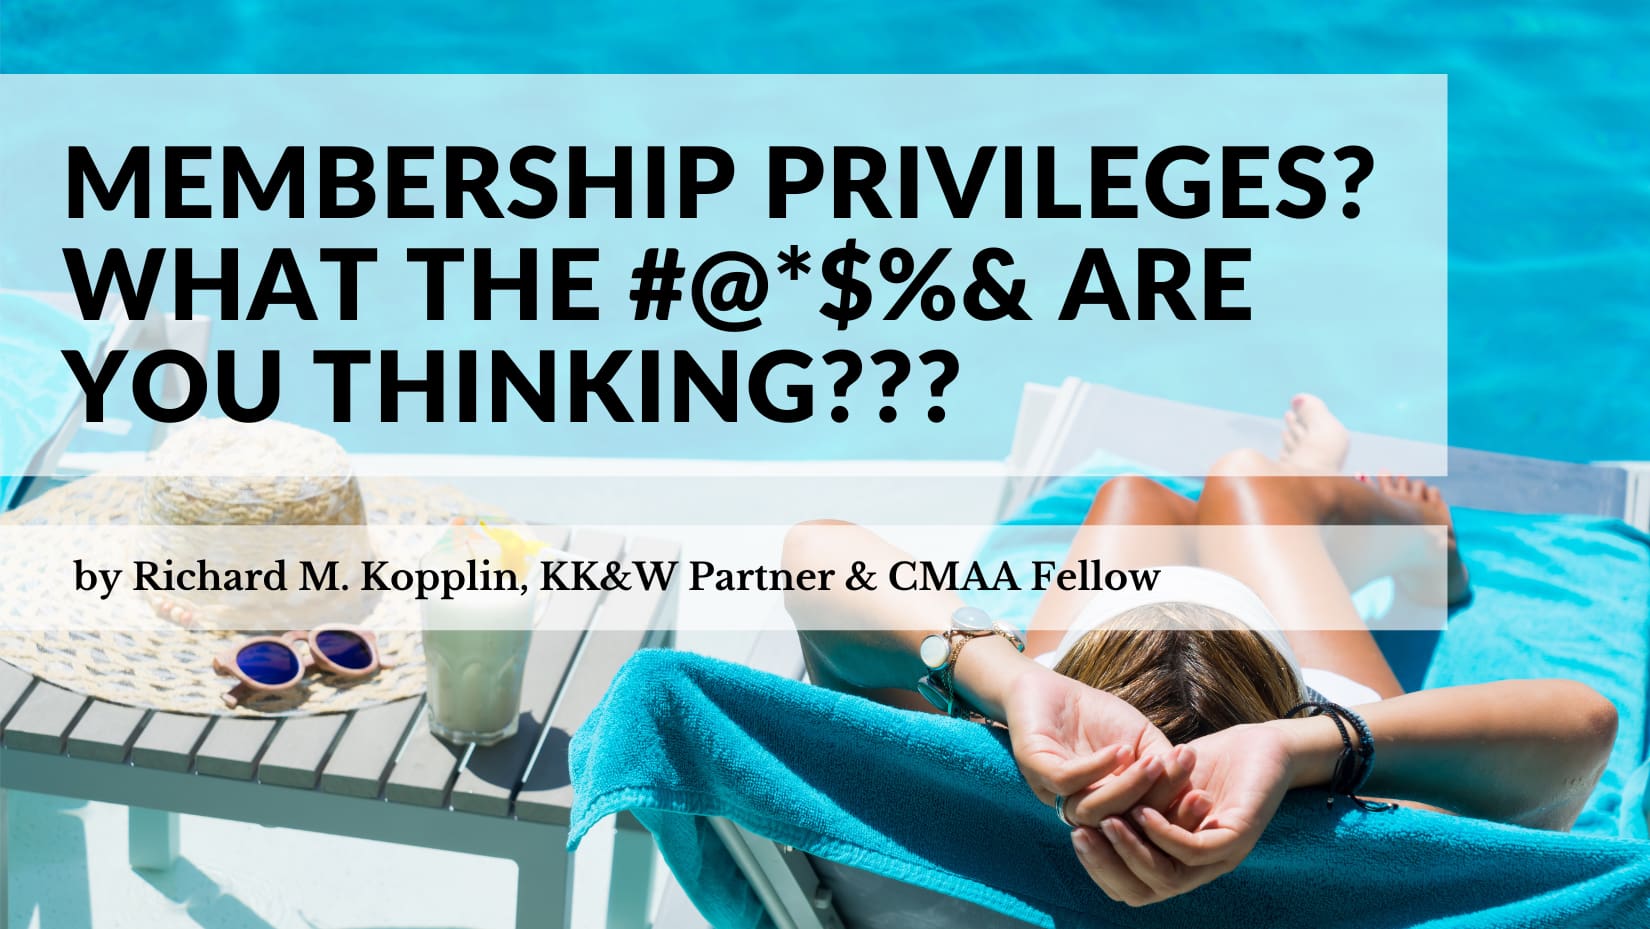 Membership Privileges? WHAT THE #@*$%& ARE YOU THINKING???